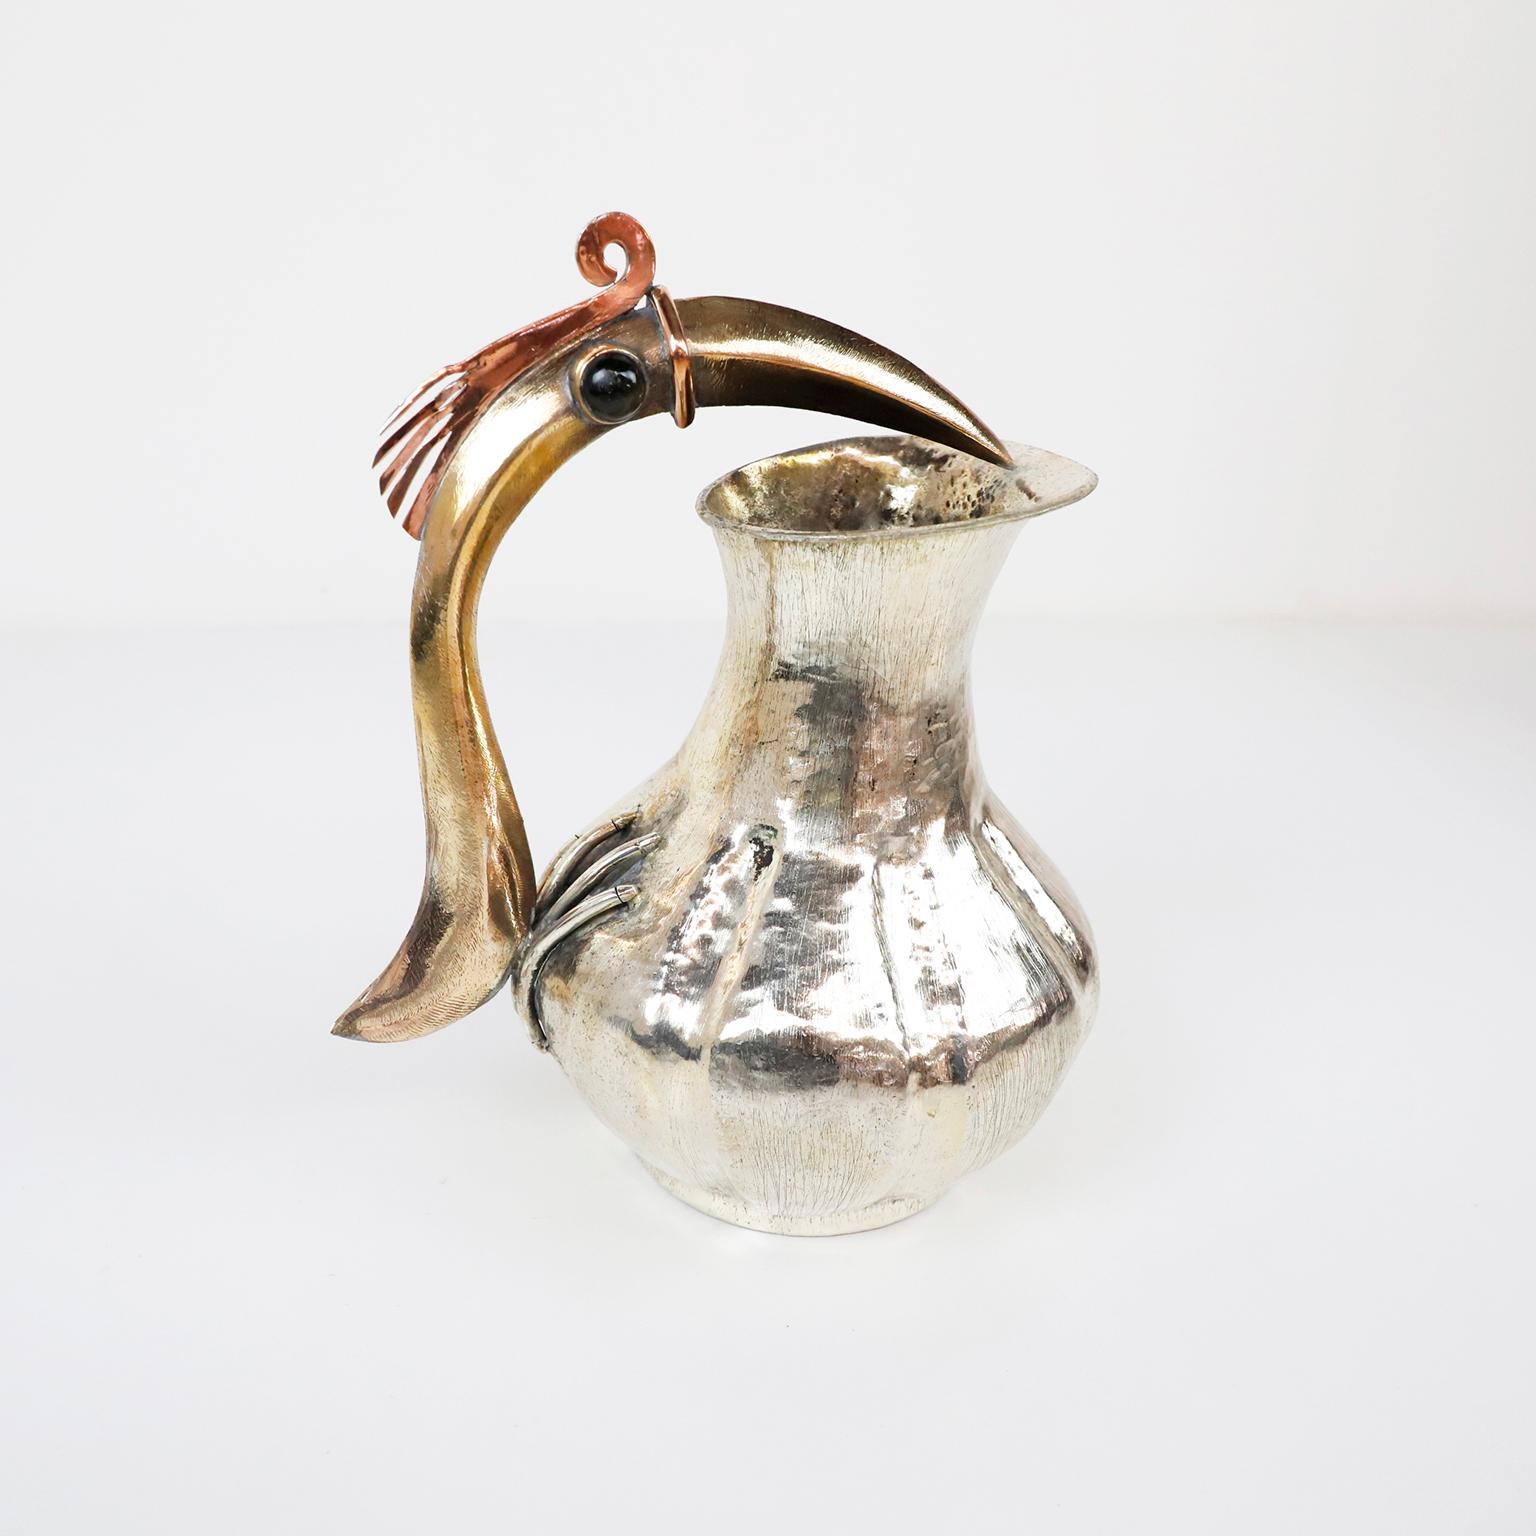 Circa 1960. We offer this Mid-Century Modern Mexican pitcher sporting an amazing handle in a bird motif by Los Castillo Taxco México. The pitcher Marked Los Castillo Taxco Mexico, in excellent condition, but adds to the patina of the piece. This is